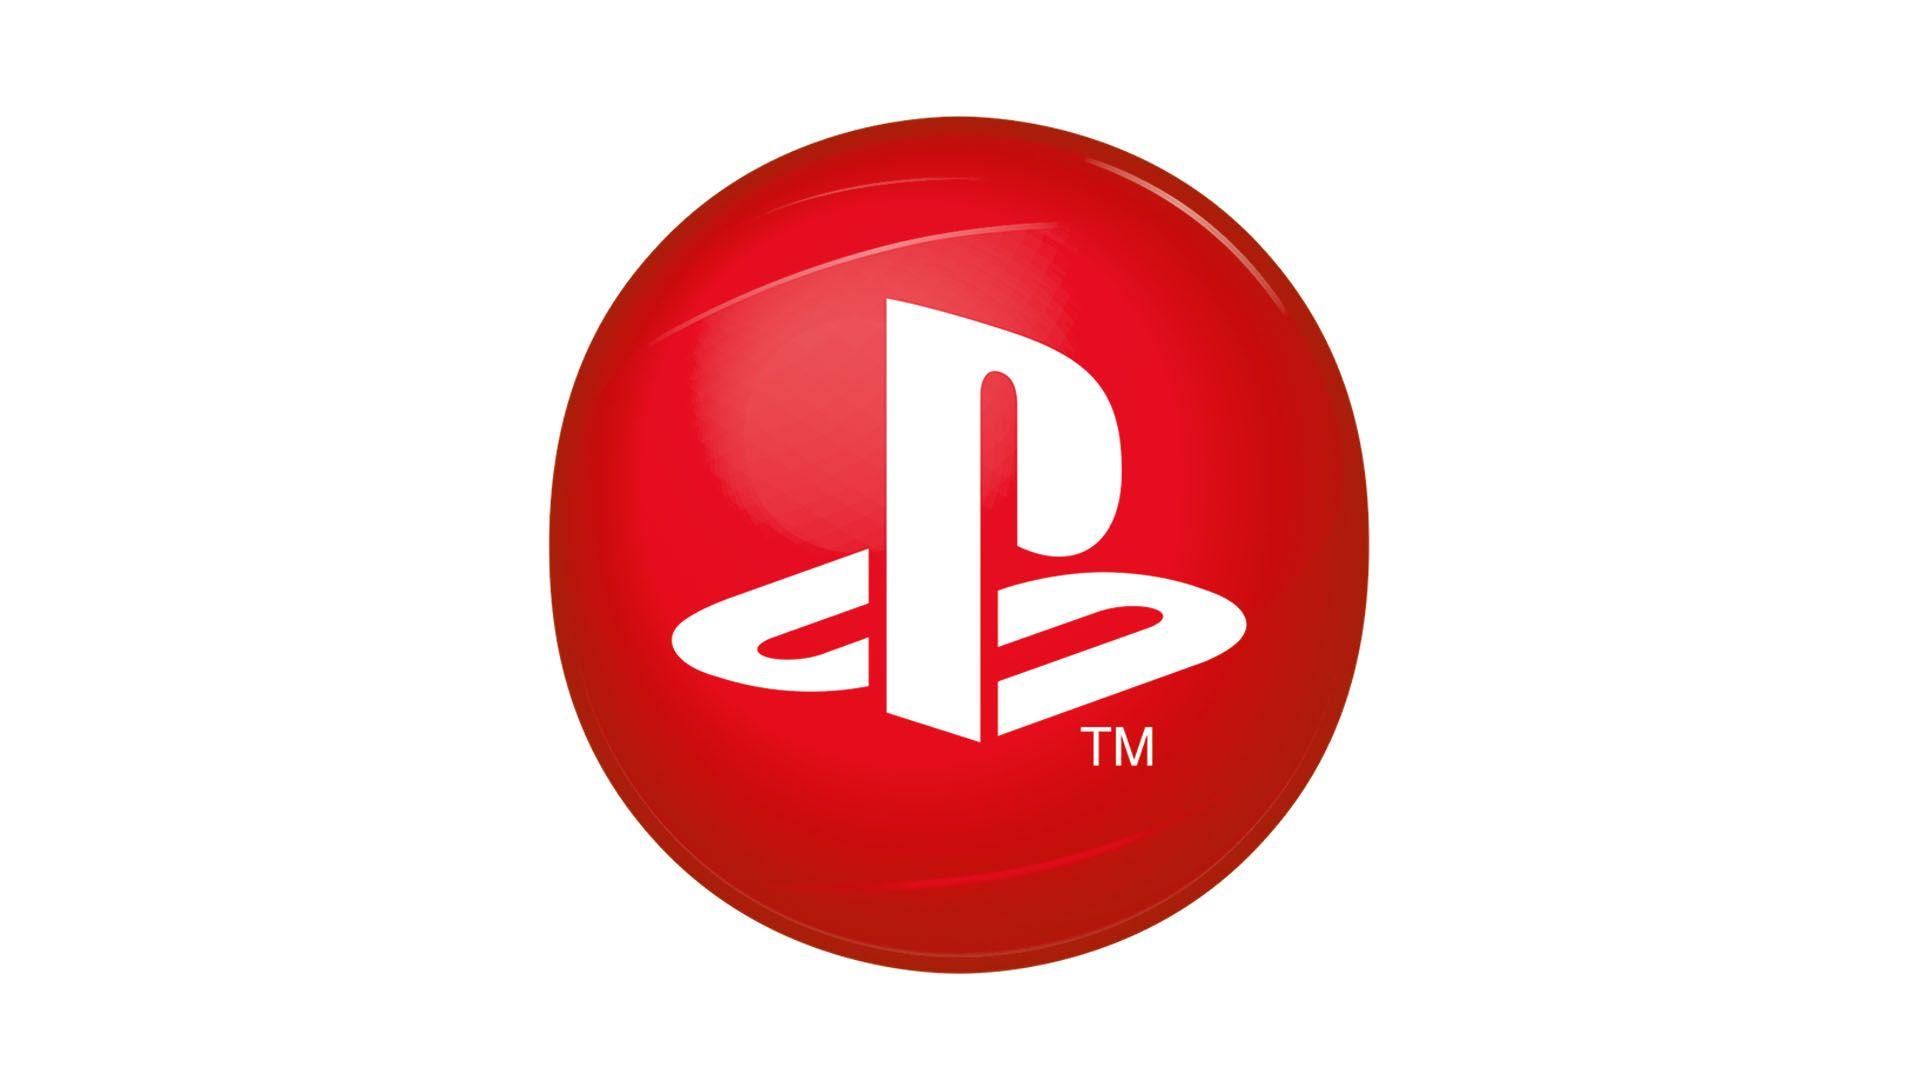 PSN Logo - How to Use a Japanese PSN Account on PS Vita Without Losing Your Data